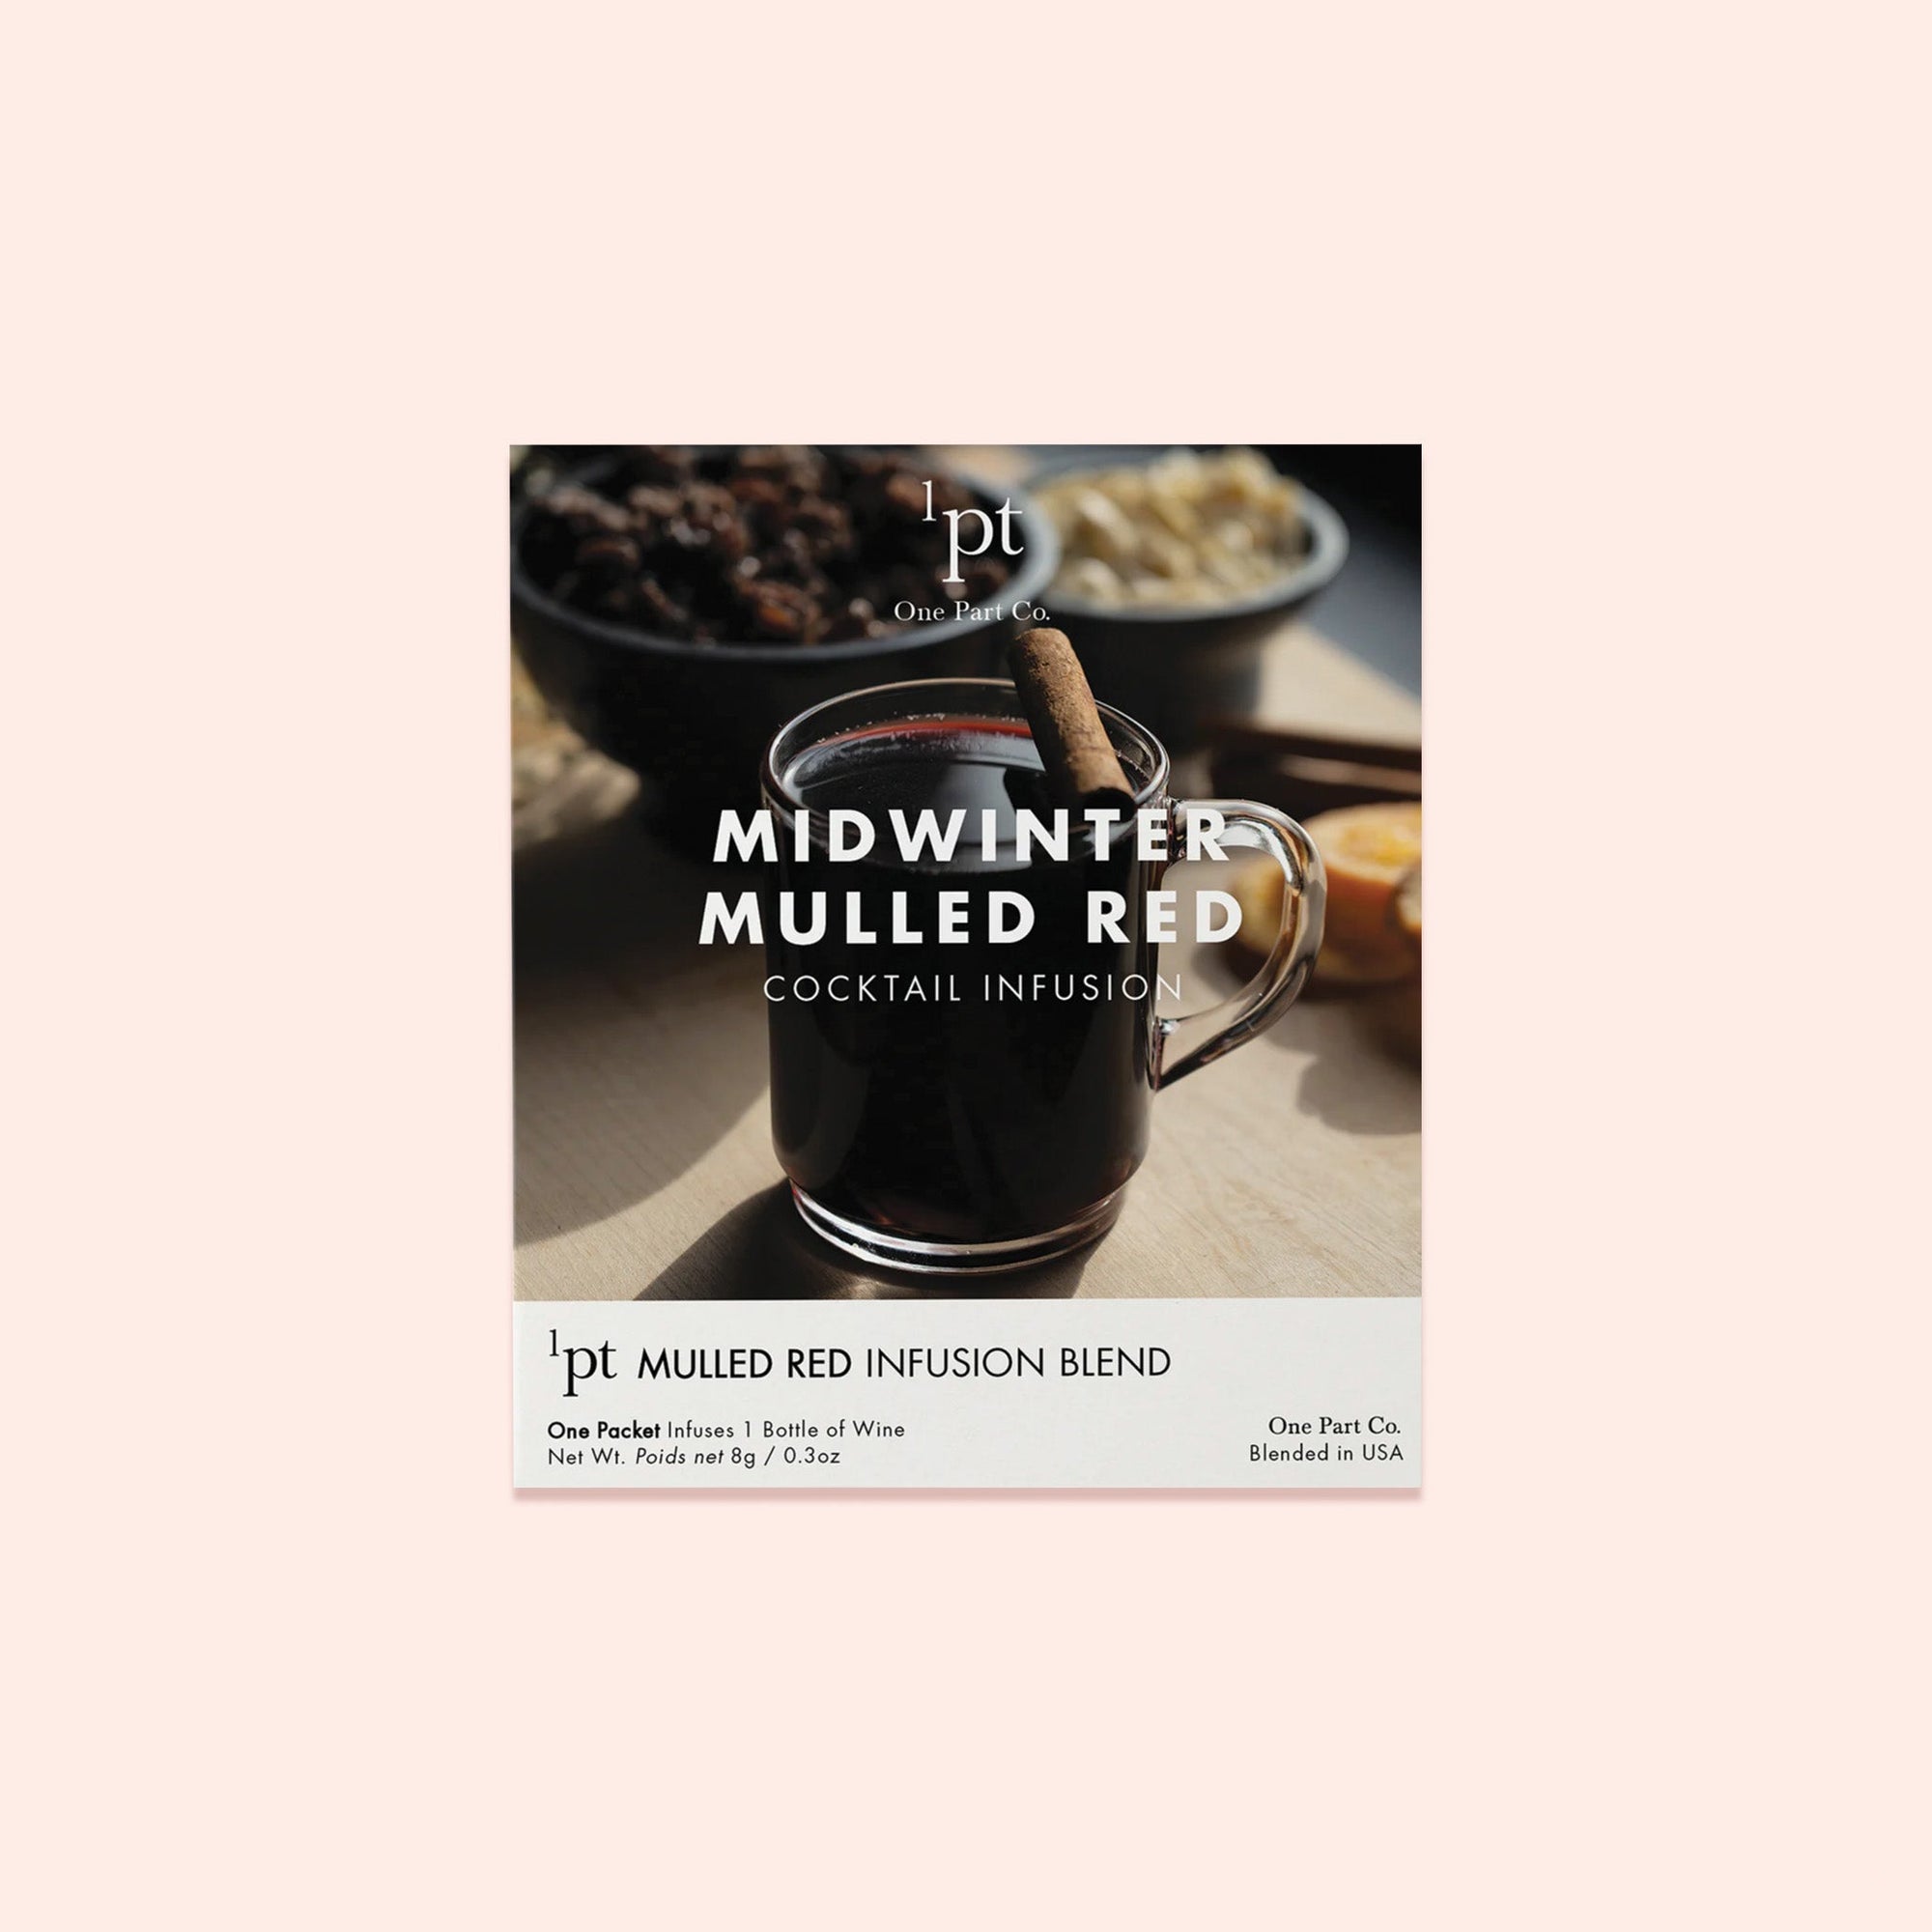 On a light pink background sits a packet with a photo of a Mulled Wine in a glass with a cinnamon stick garnish. It is a 'MIDWINTER MULLED RED COCKTAIL INFUSION' from One Part Co. One Packet infuses 1 Bottle of Wine. Net Wt. 8g / 0.3oz. 